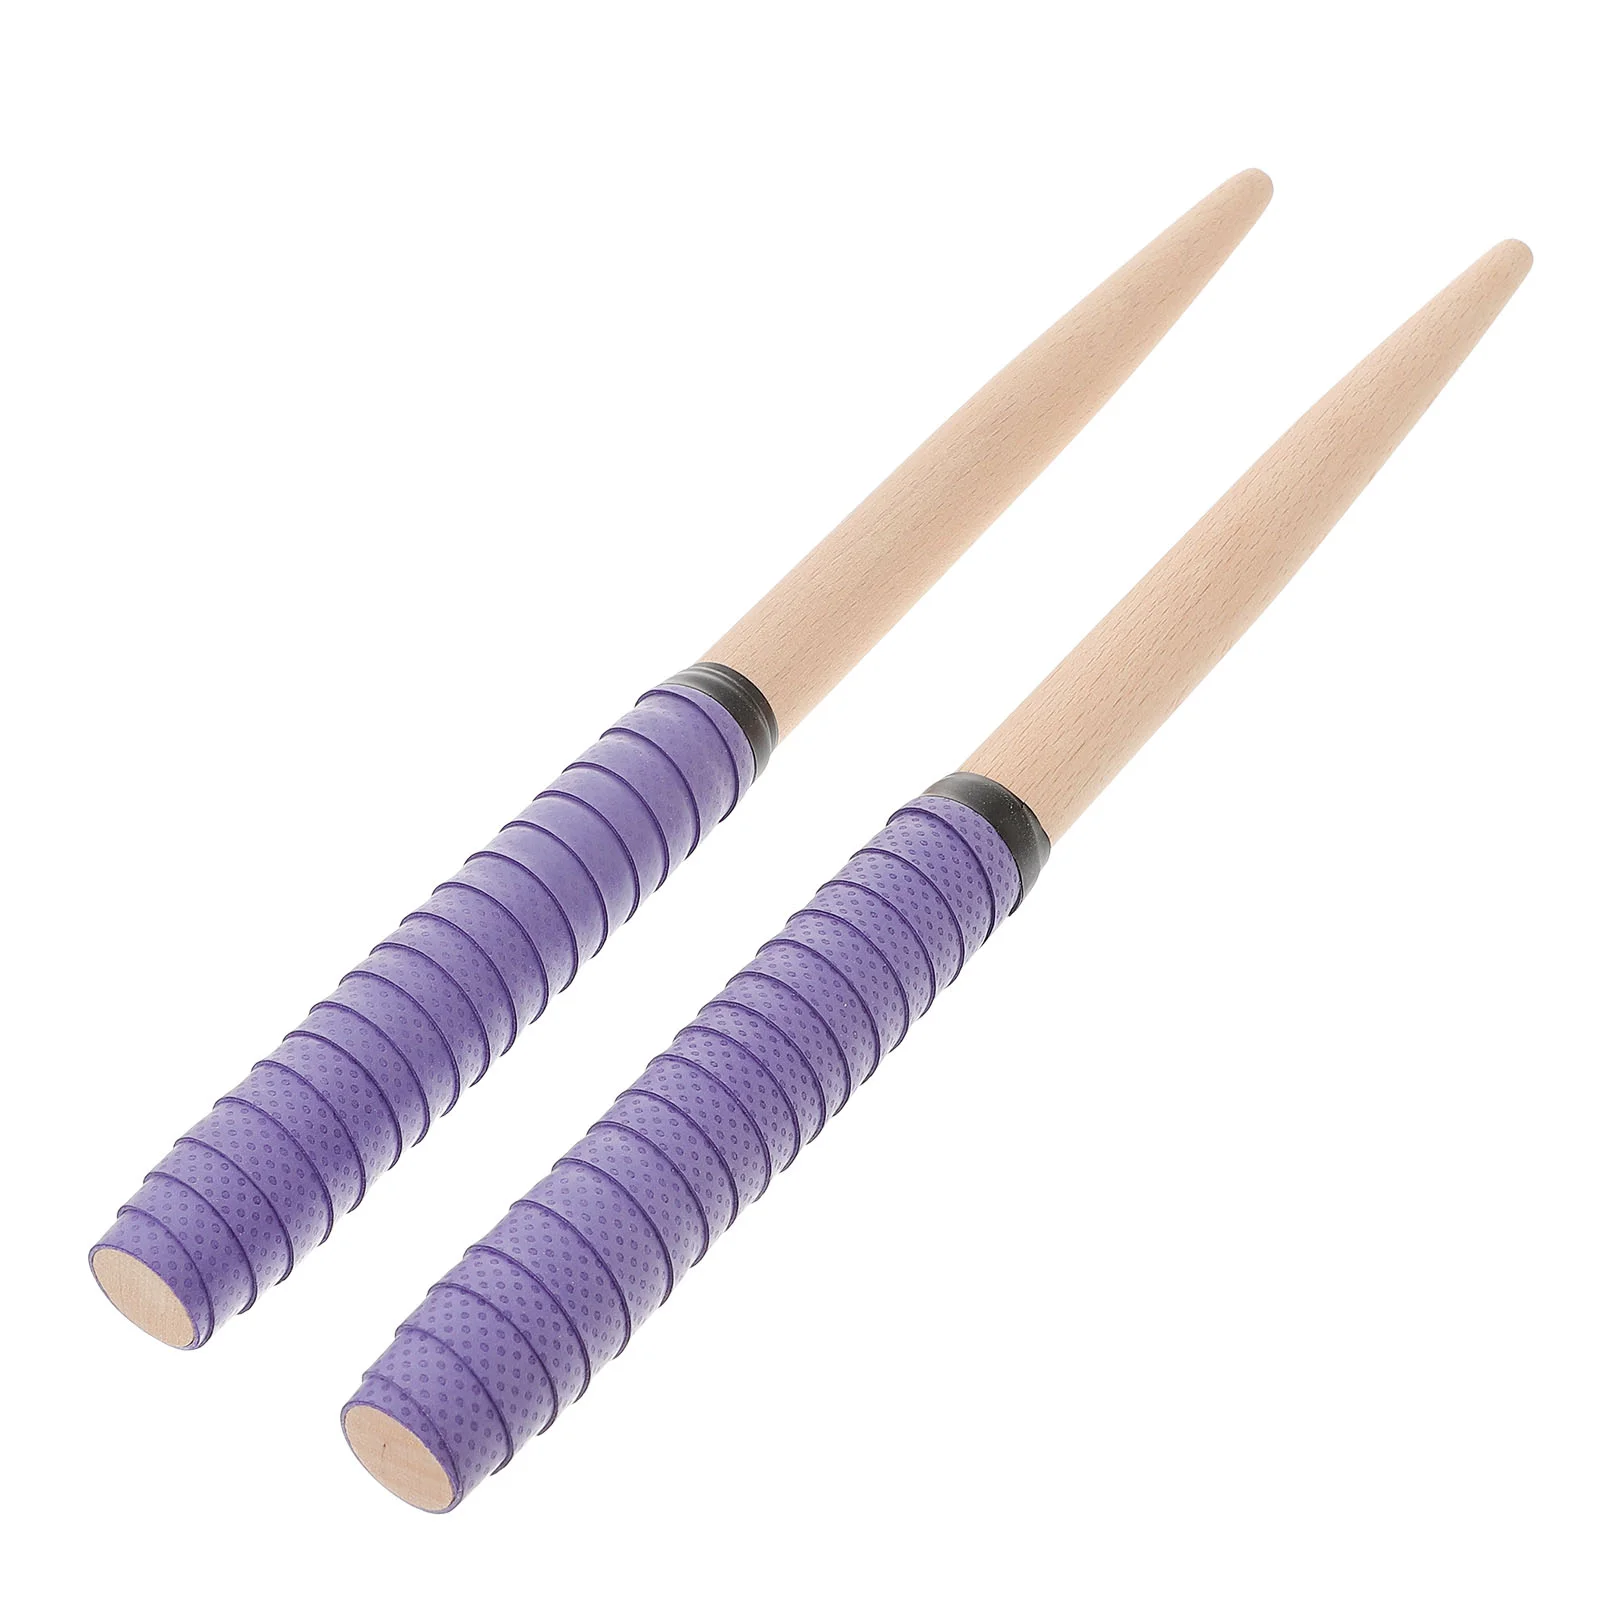 

1Pair Wooden Drum Sticks Drum Mallets Wood Tip Drumstick Percussion Instrument Accessories for Kids Adults Lovers Purple